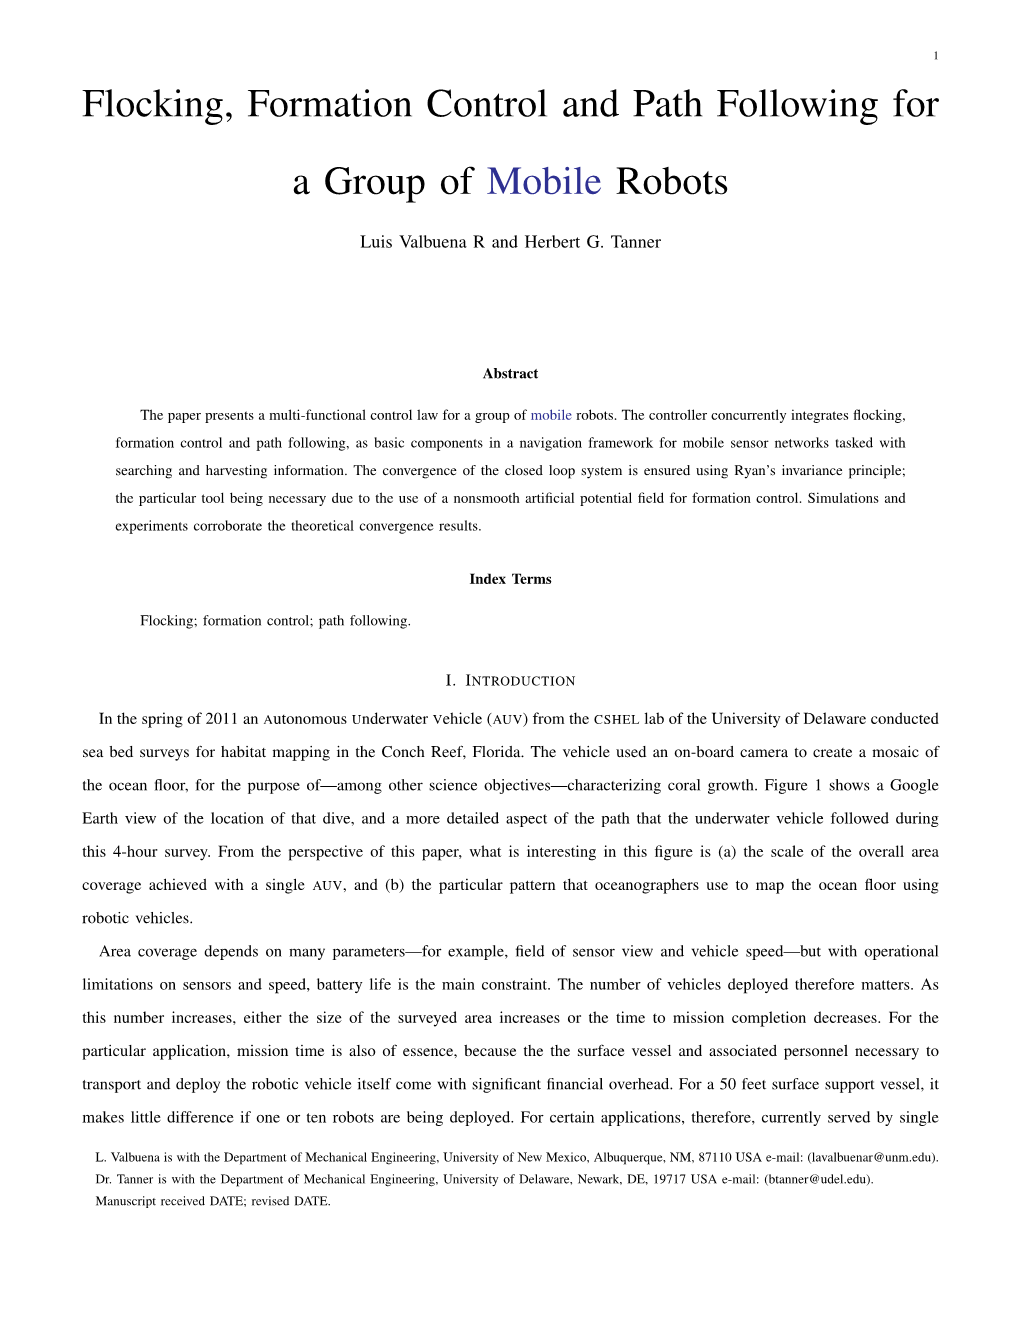 Flocking, Formation Control and Path Following for a Group of Mobile Robots